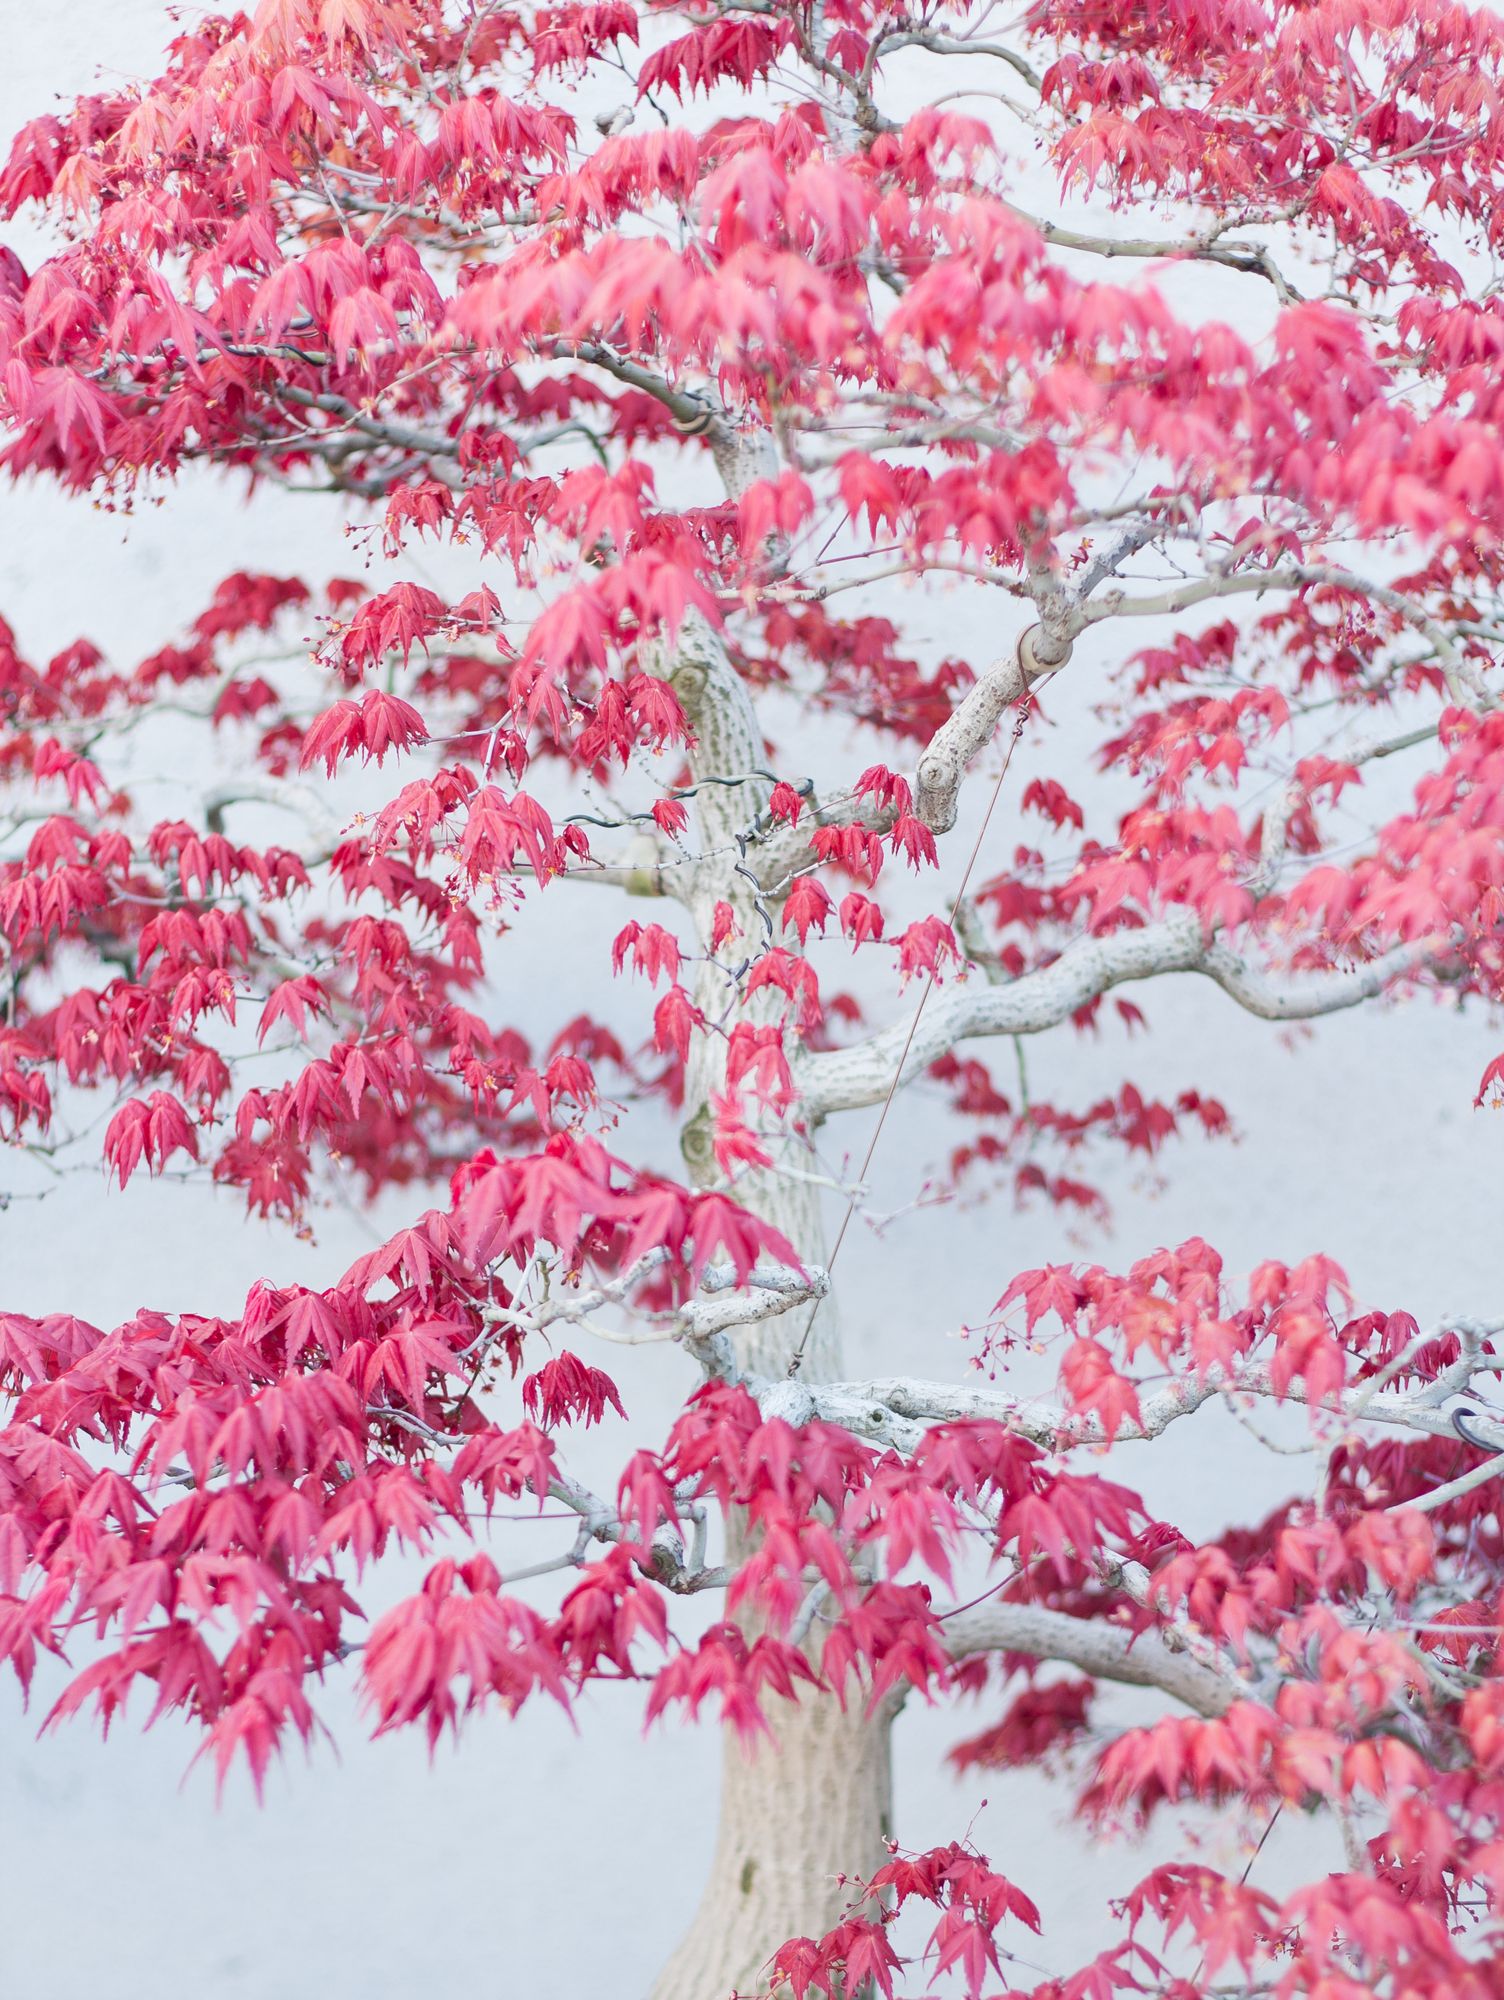 Tall bonsai tree with pink leaves and a white trunk and branches